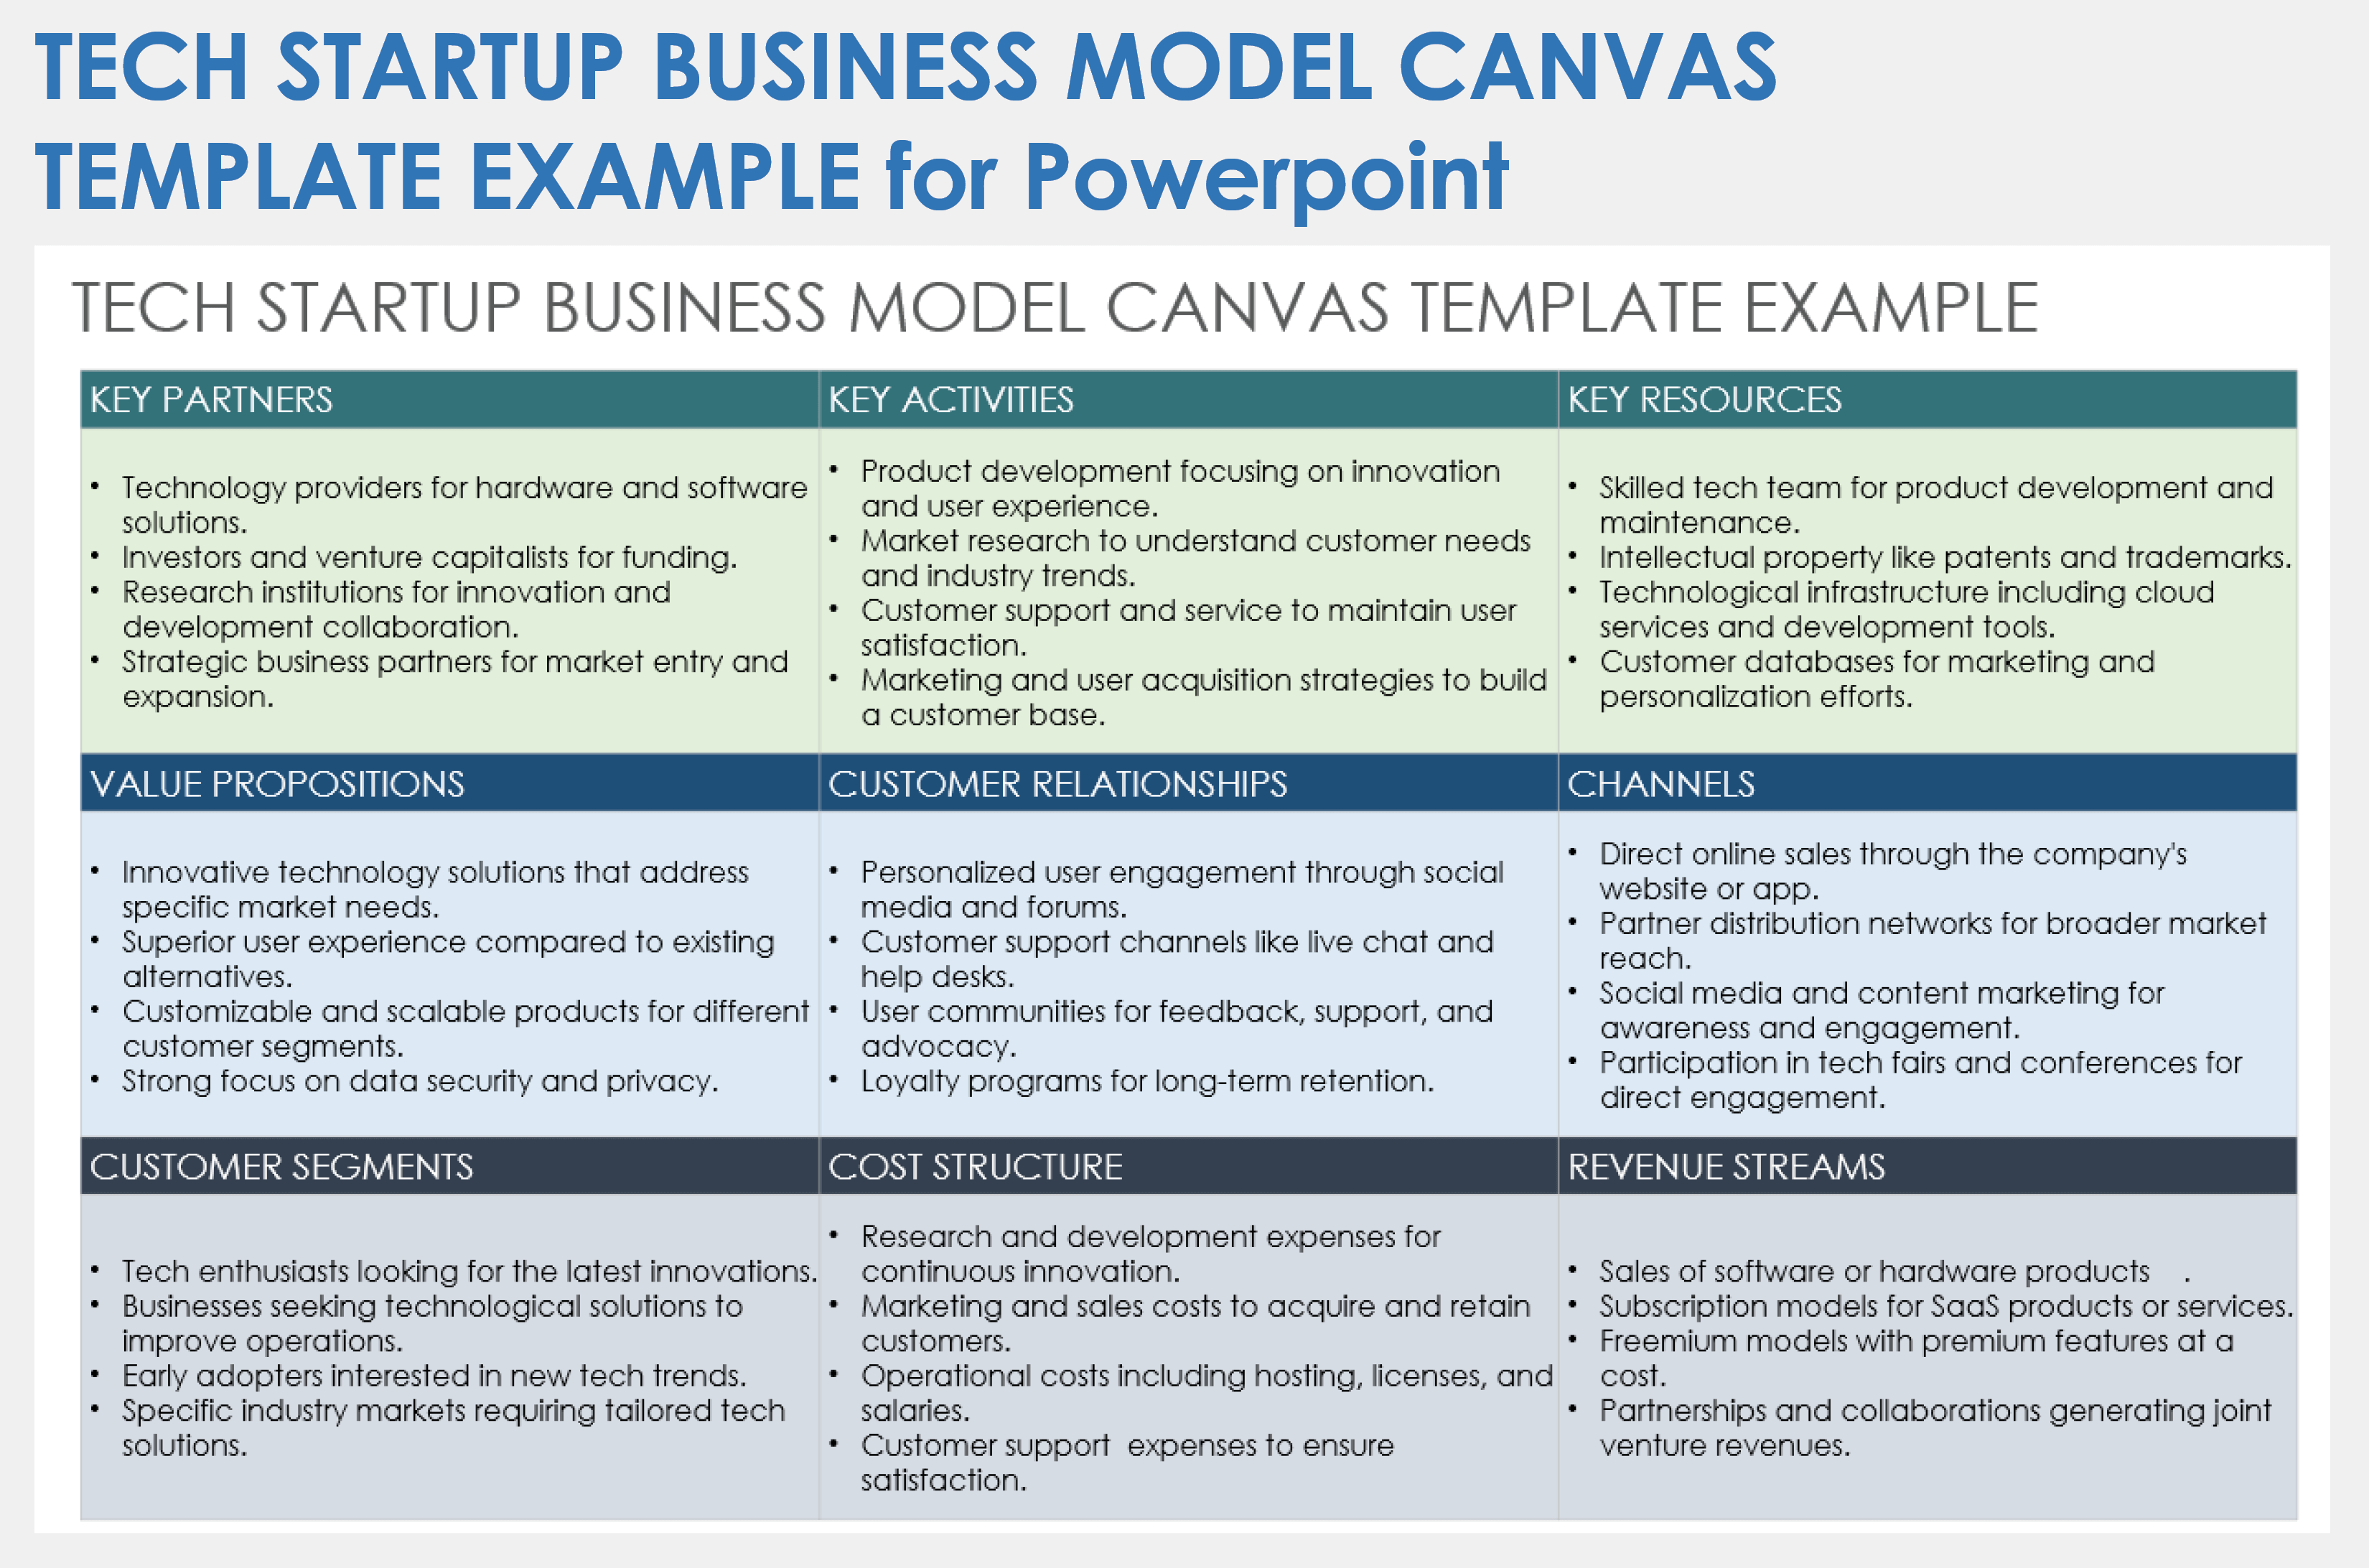 Tech Startup Model Canvas Template for Powerpoint